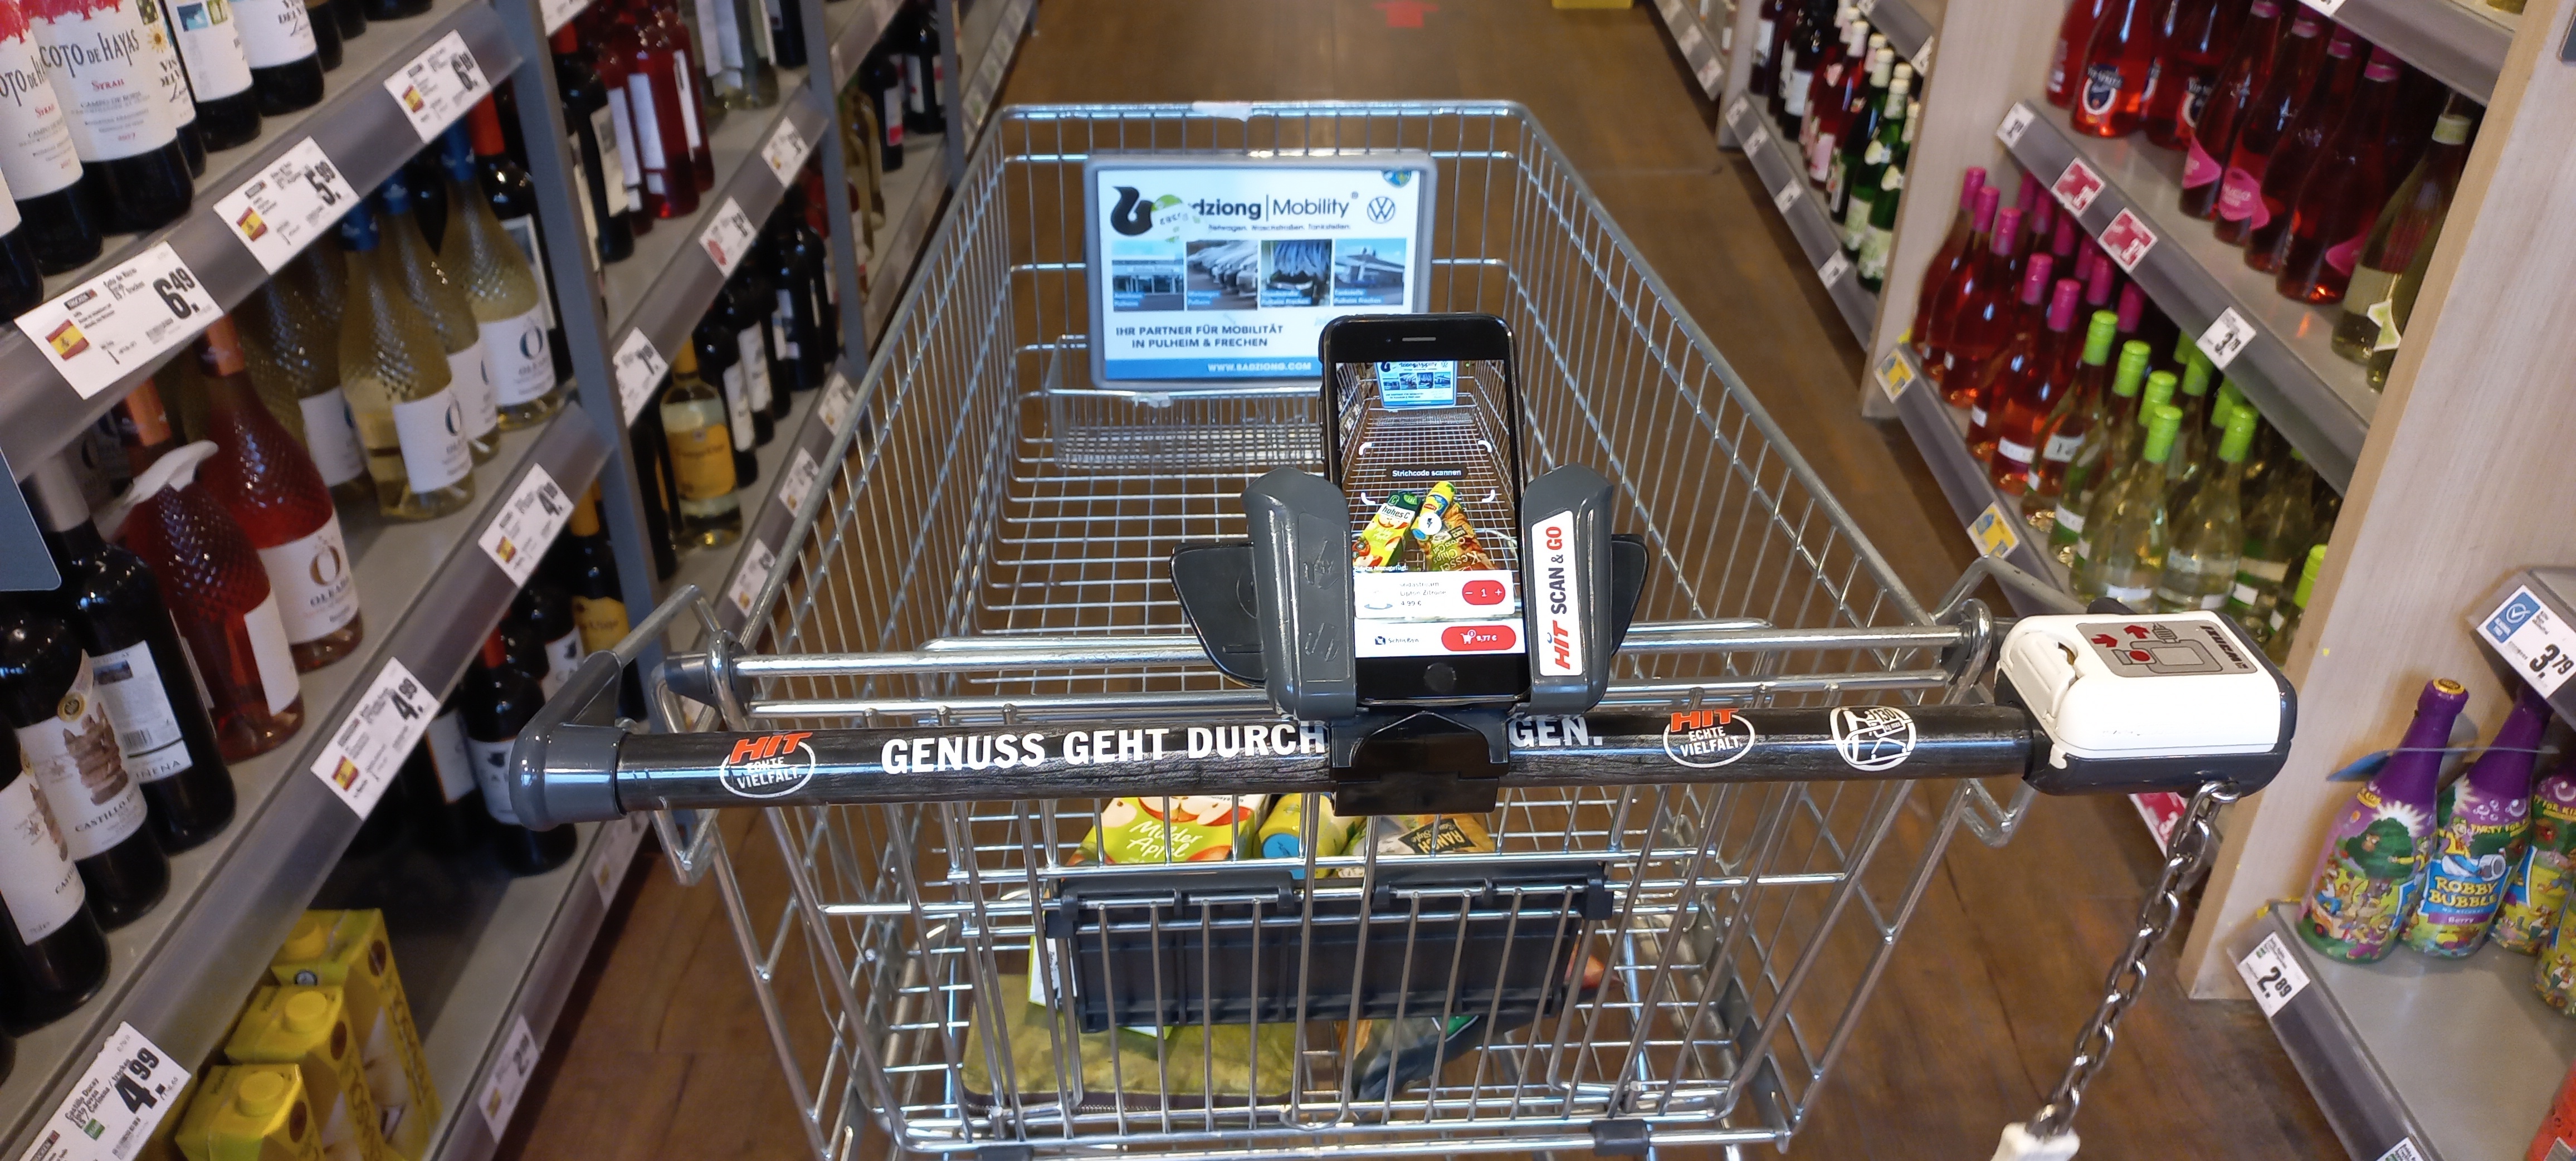 Smartphone on shopping cart